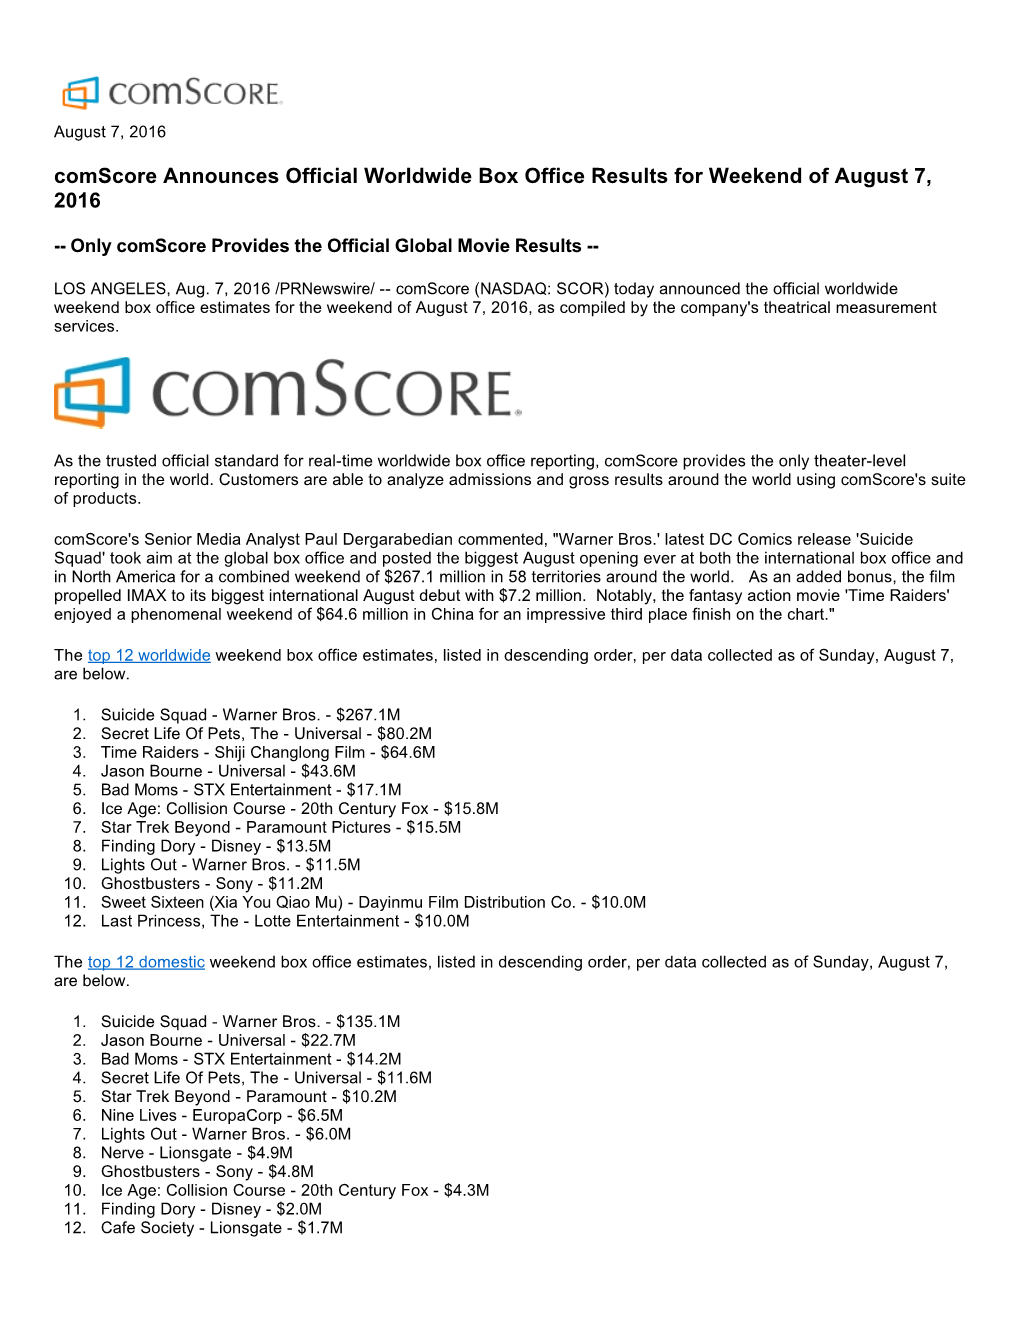 Comscore Announces Official Worldwide Box Office Results for Weekend of August 7, 2016